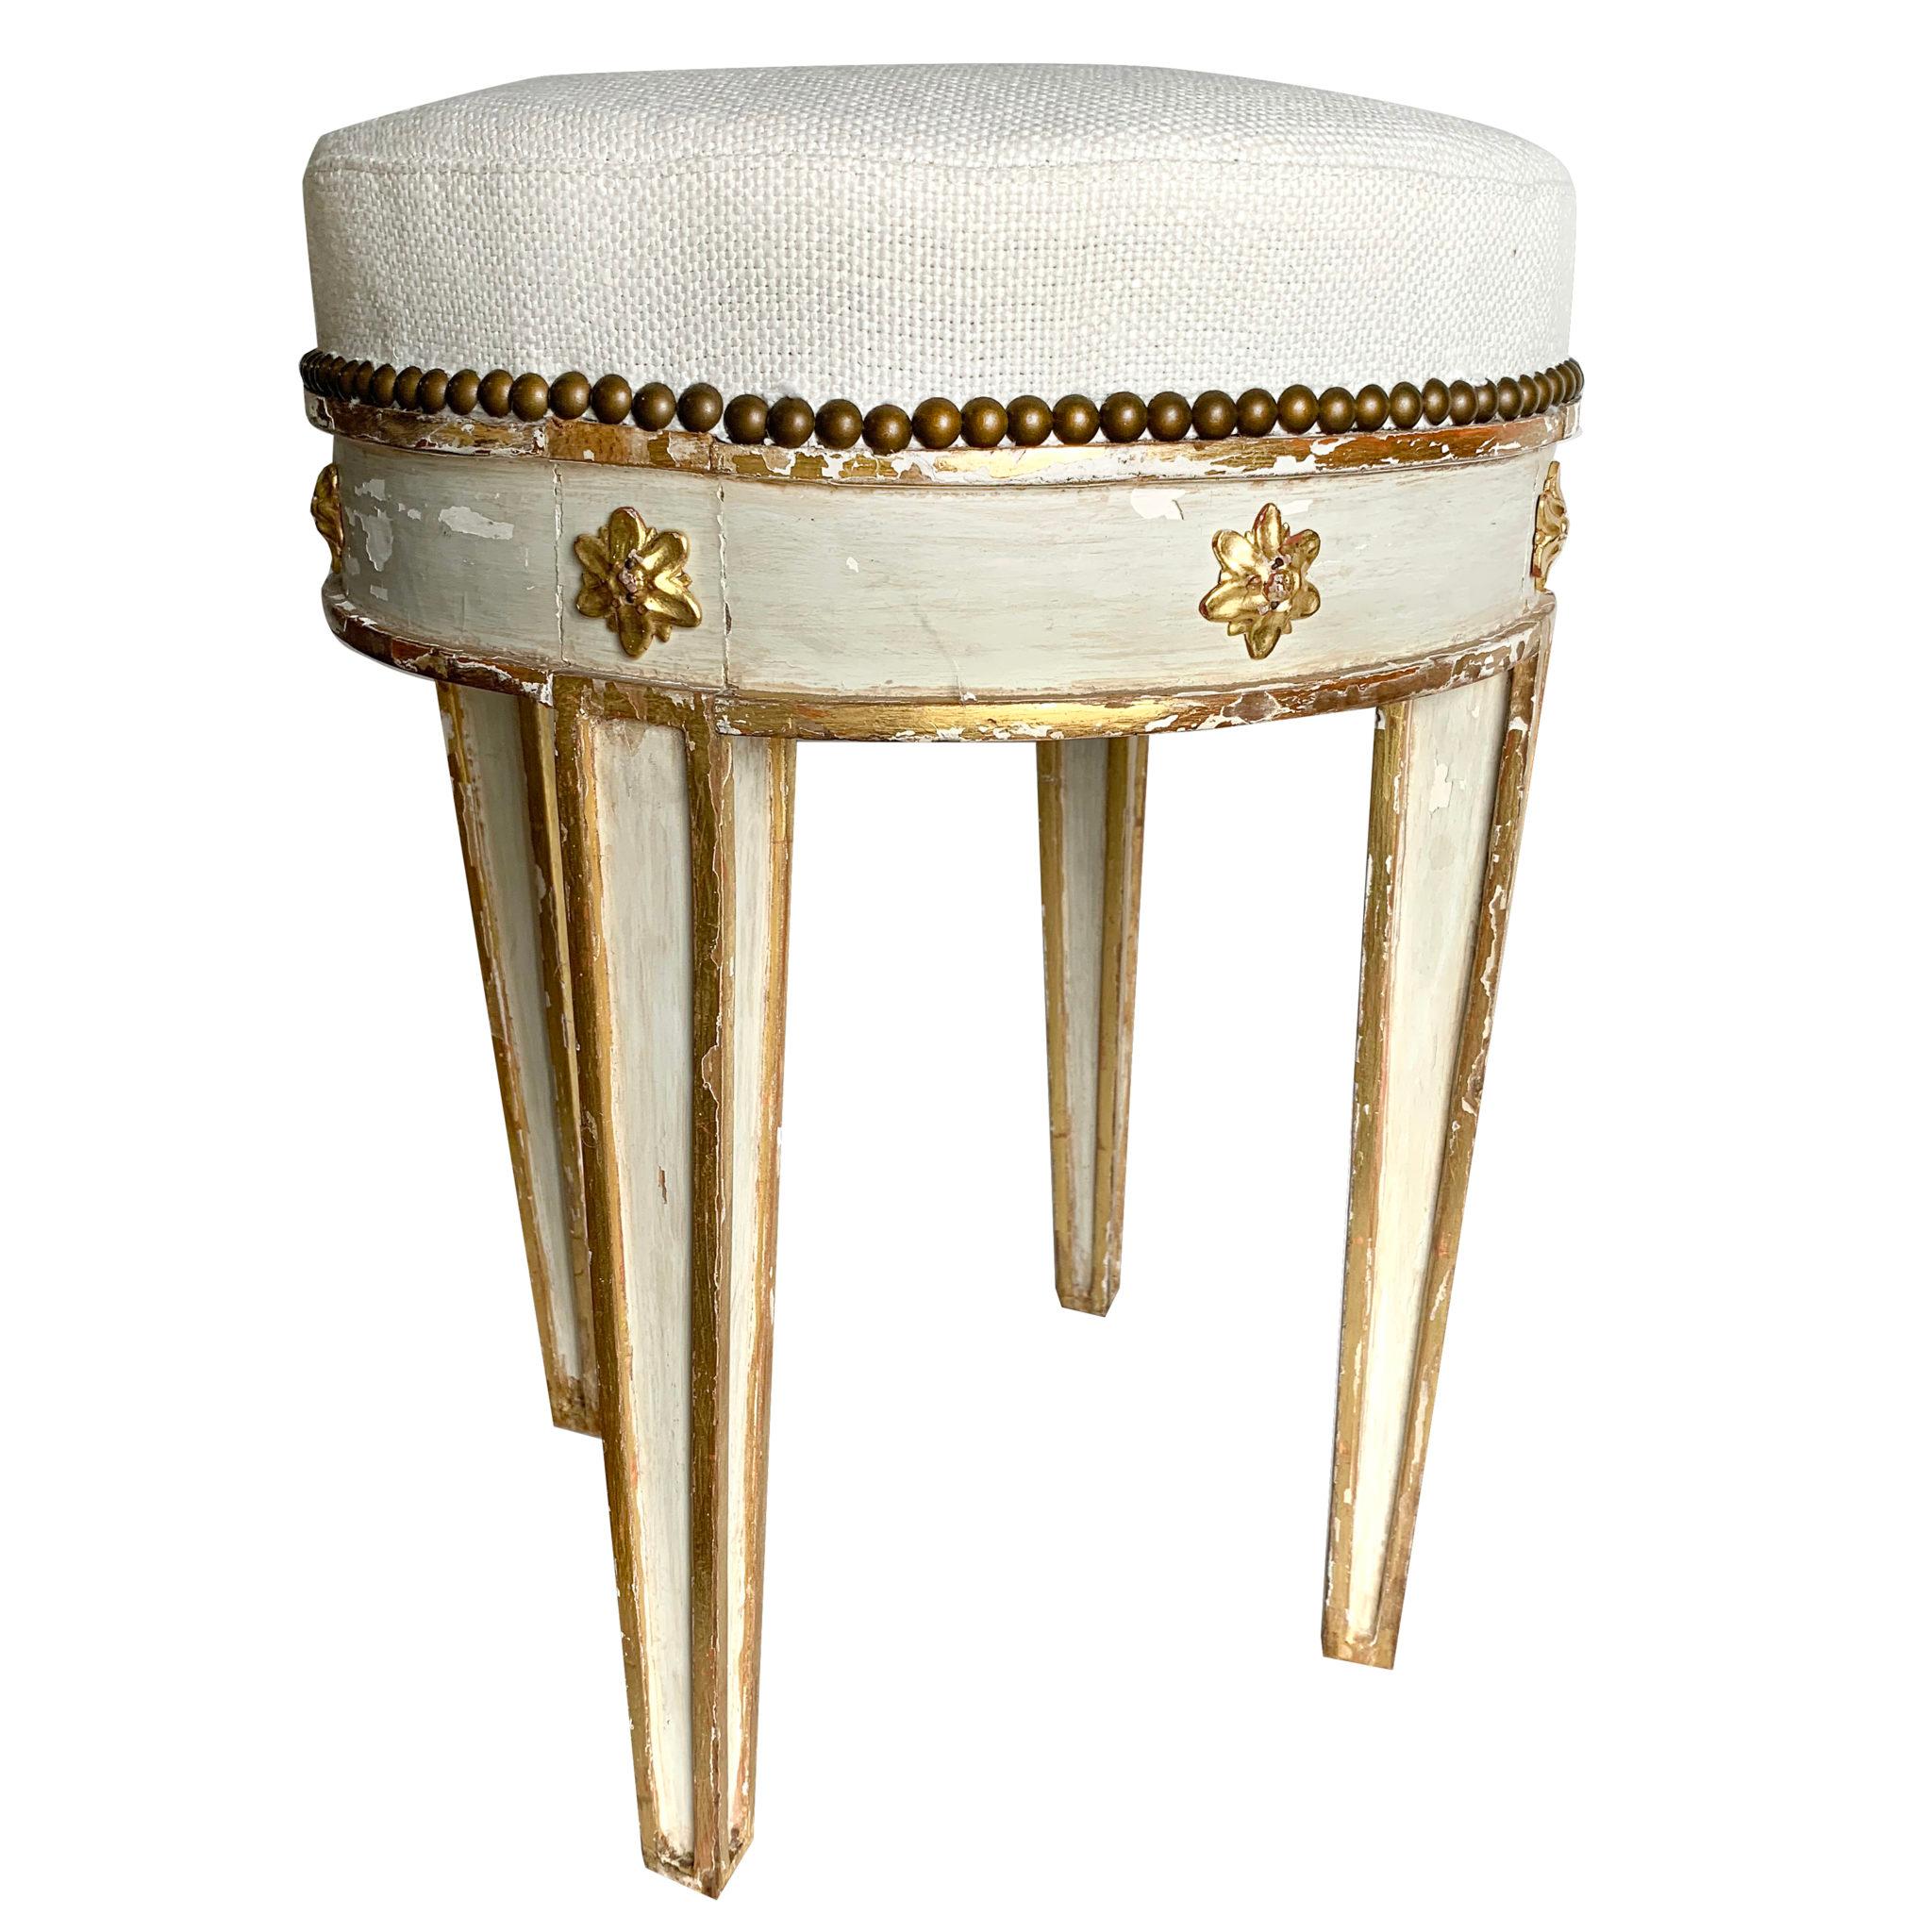 18th century pair of painted and gilt tabouret stools.